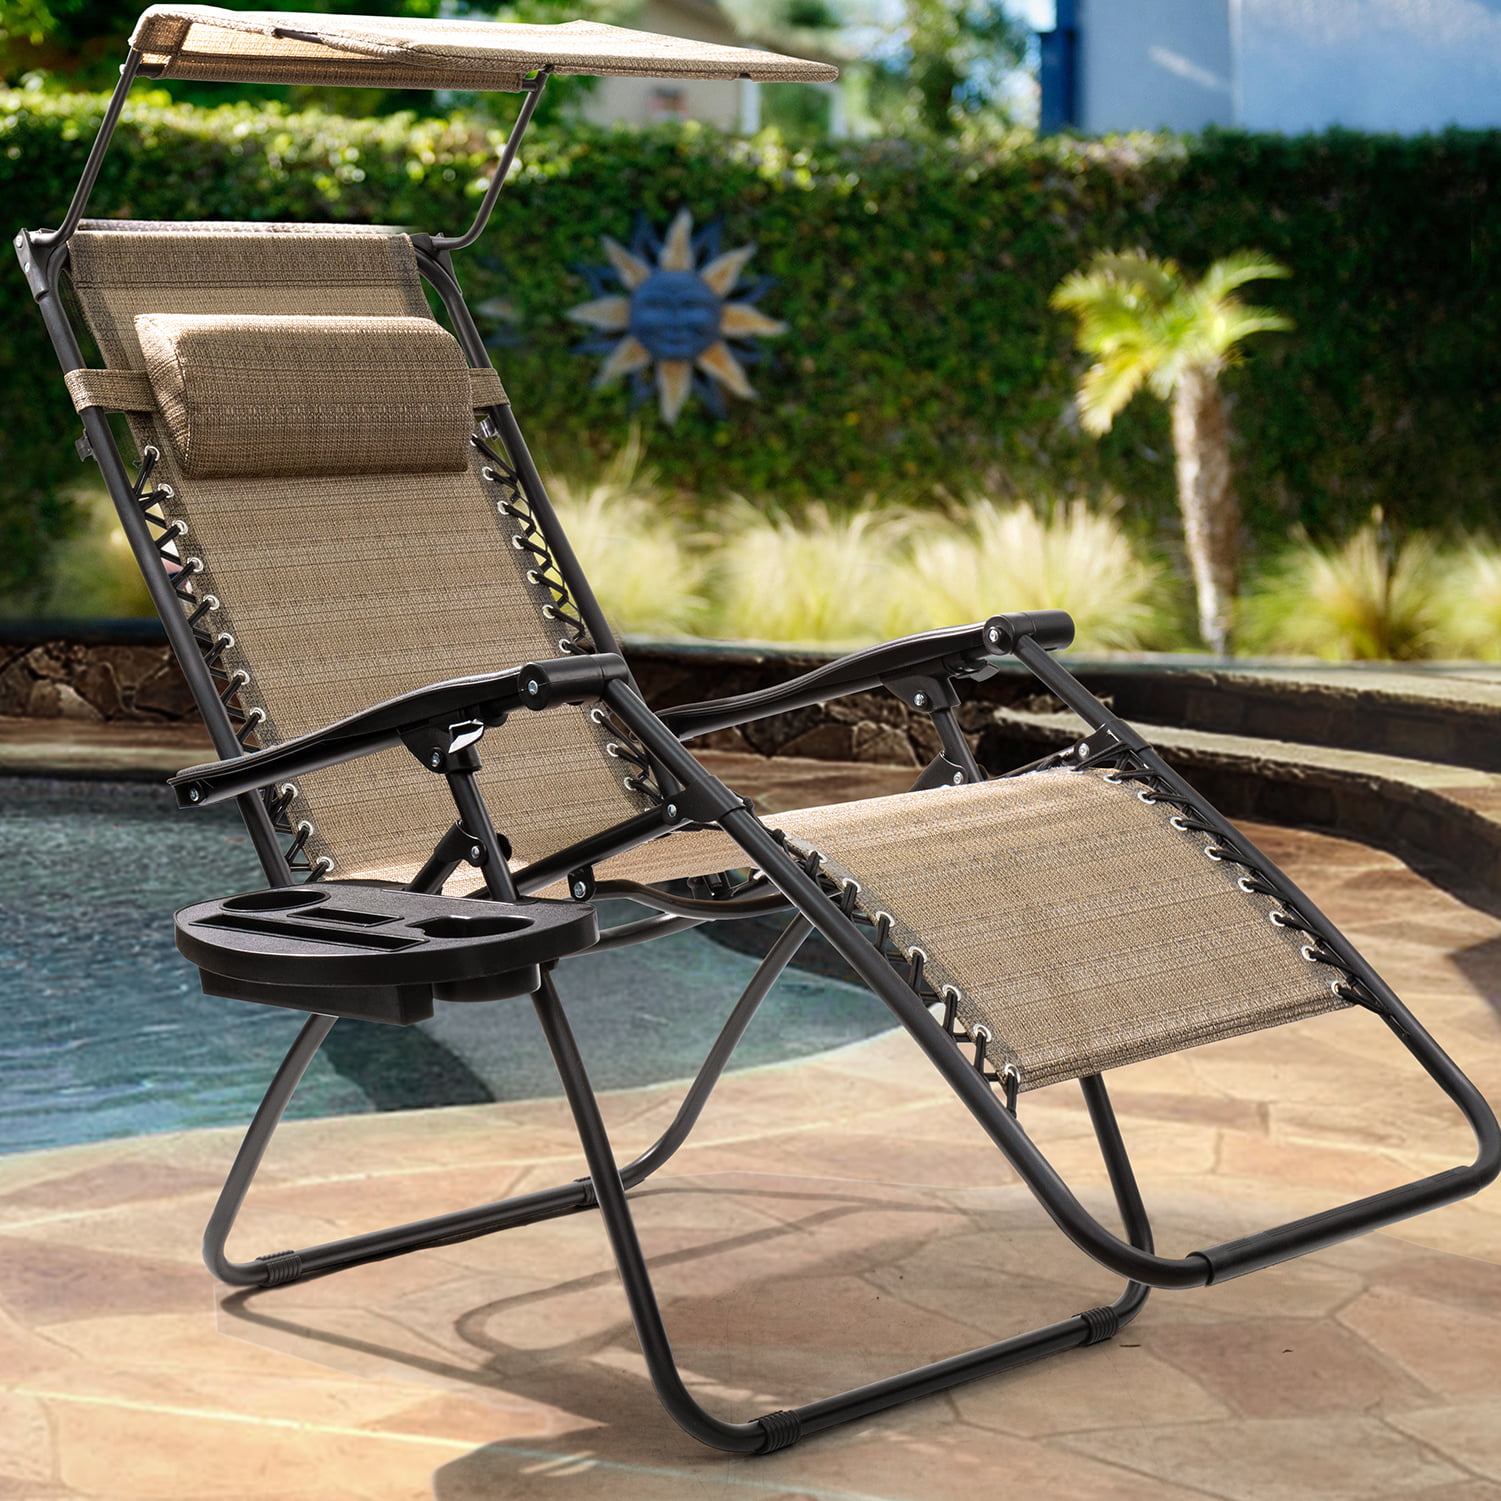 Details about   Chair Lawn Black Cup Holder For Zero Gravity Patio Lounge Pool Beach Side Tray 